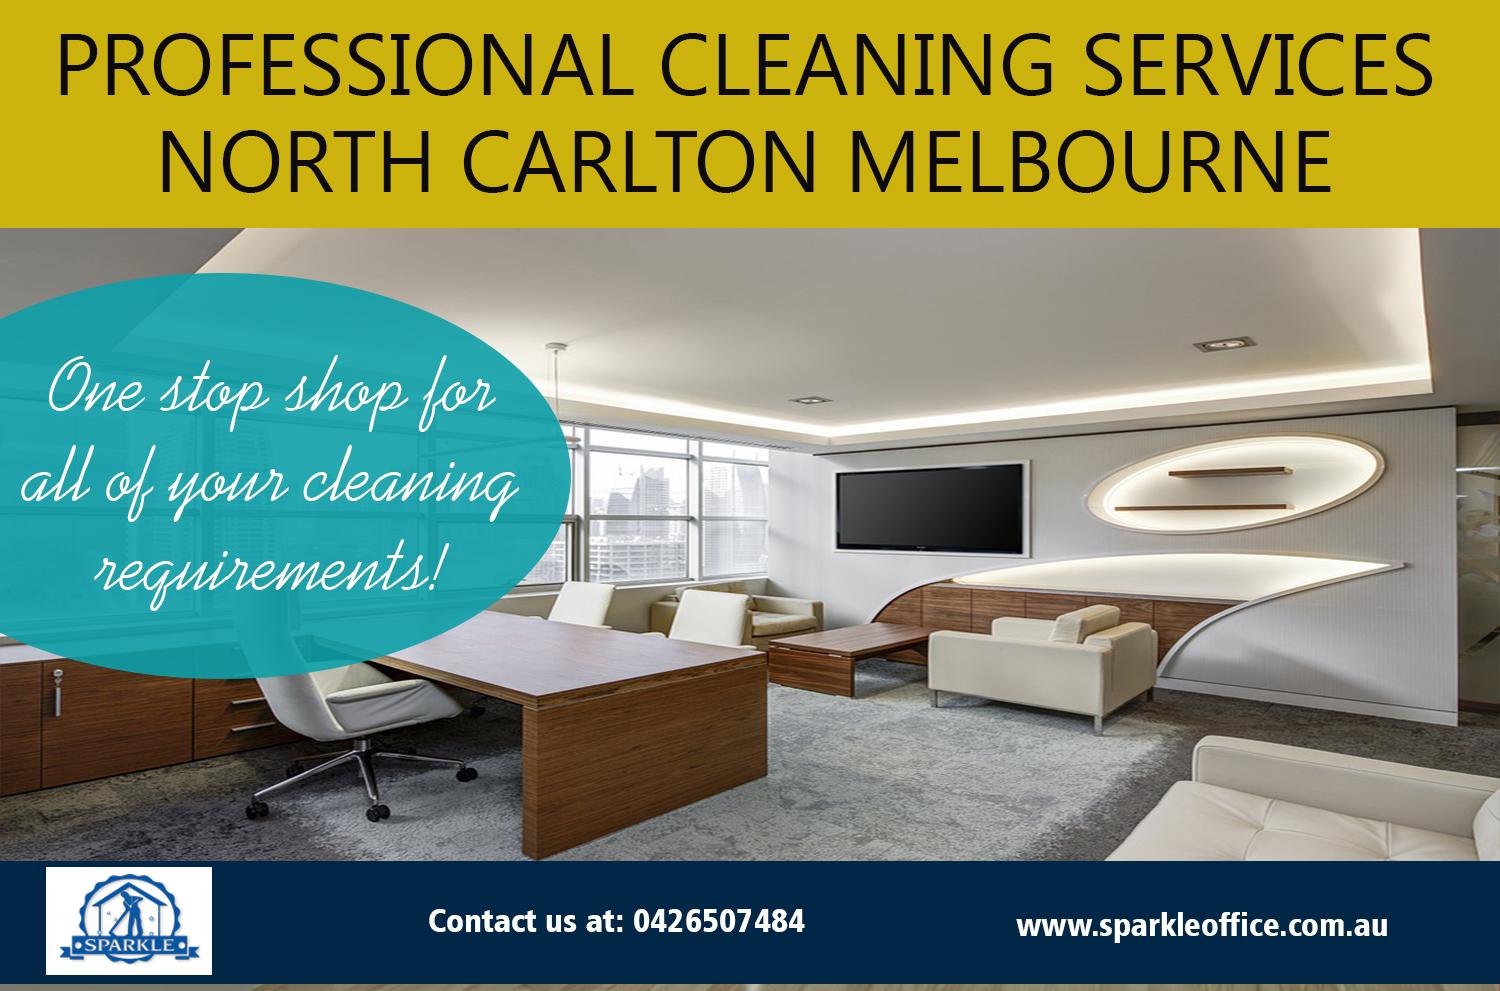 Professional Cleaning Services North Carlton Melbourne